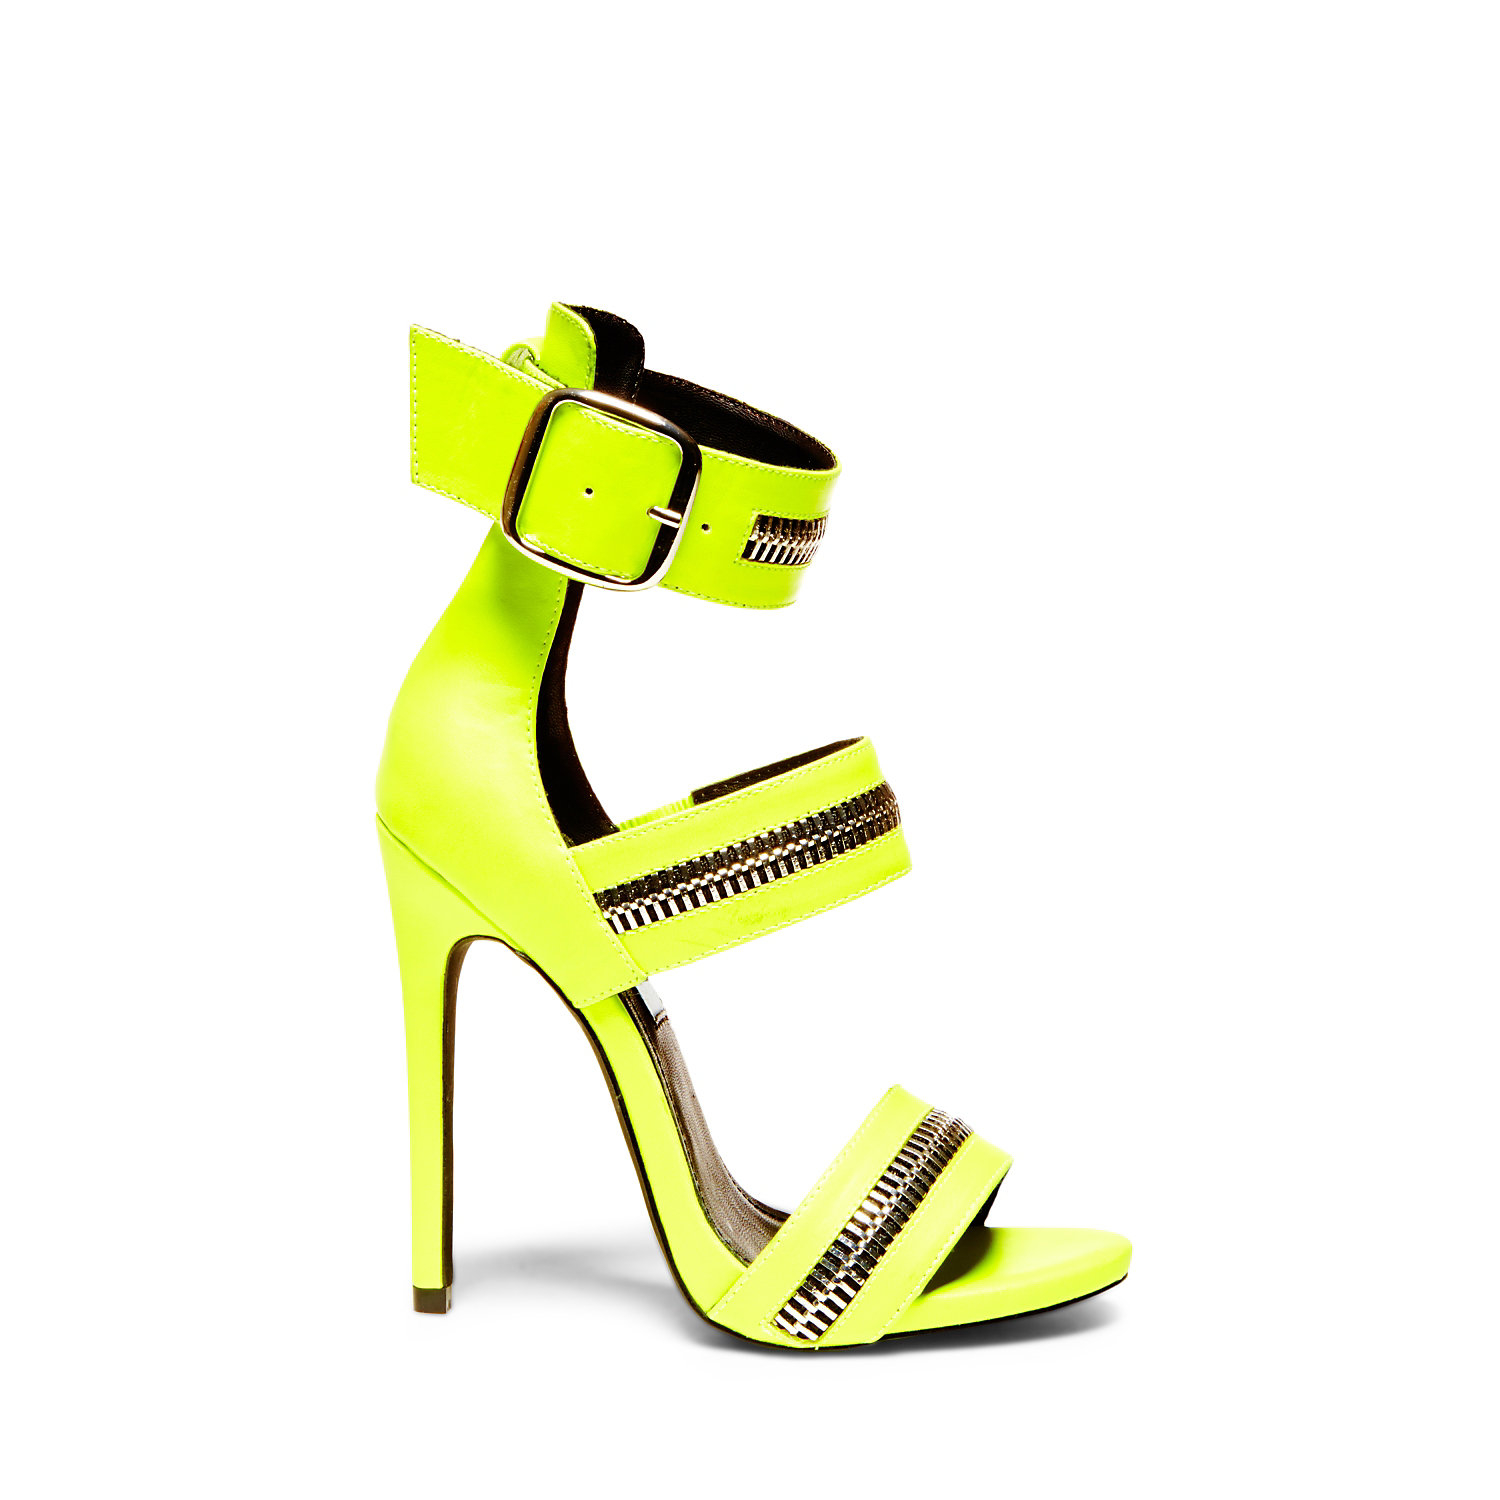 Lyst - Steve Madden Mourow in Yellow